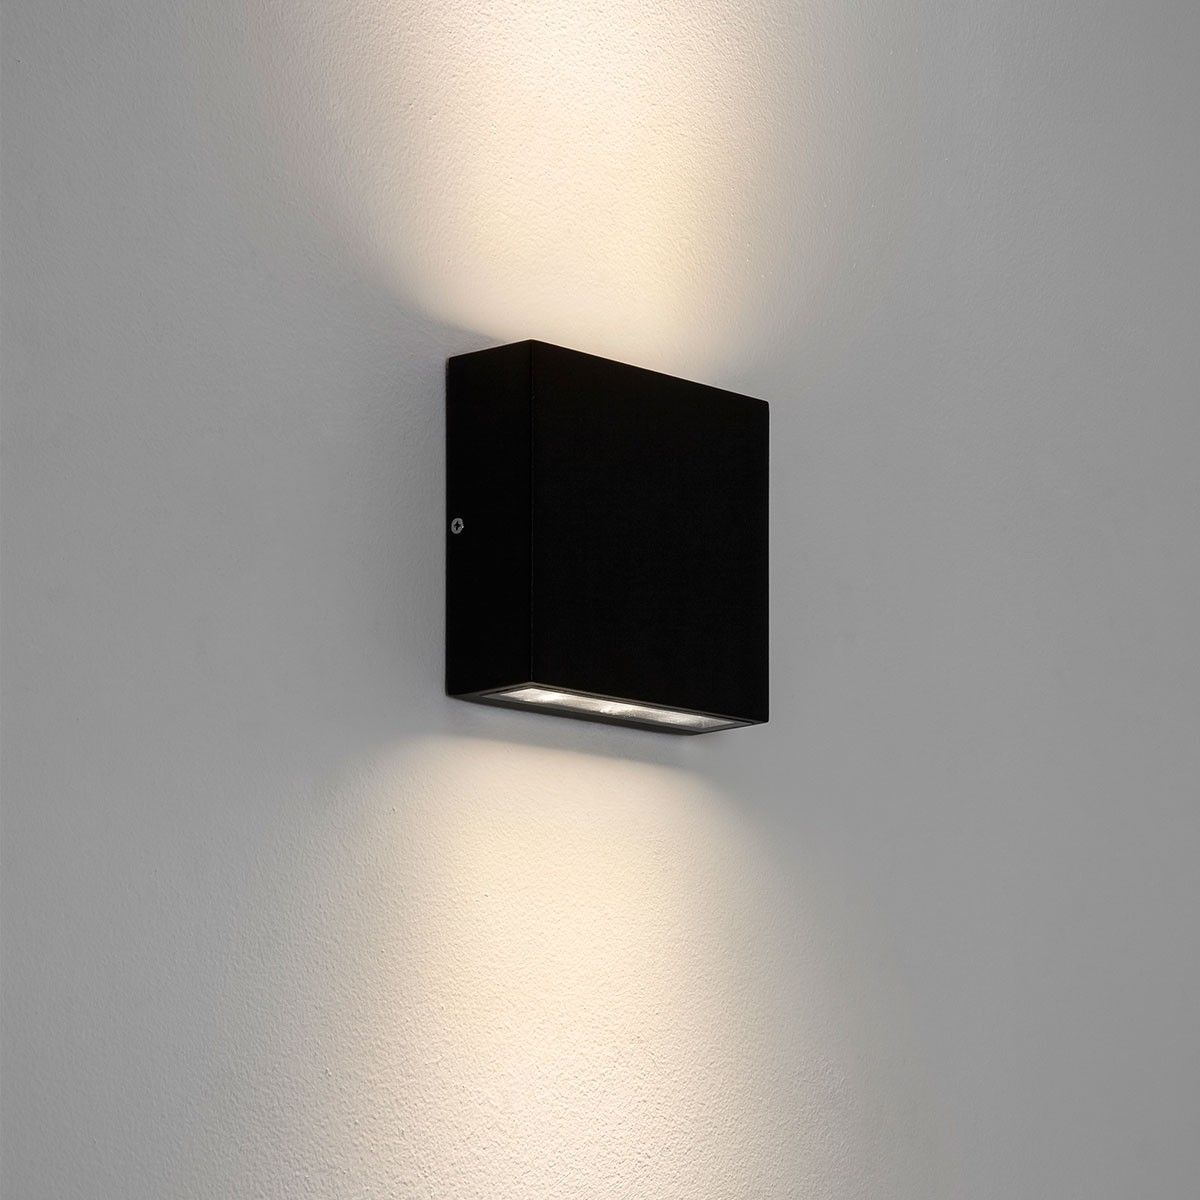 Astro Elis Twin Black Outdoor Led Wall Light At Uk Electrical Supplies (View 10 of 15)